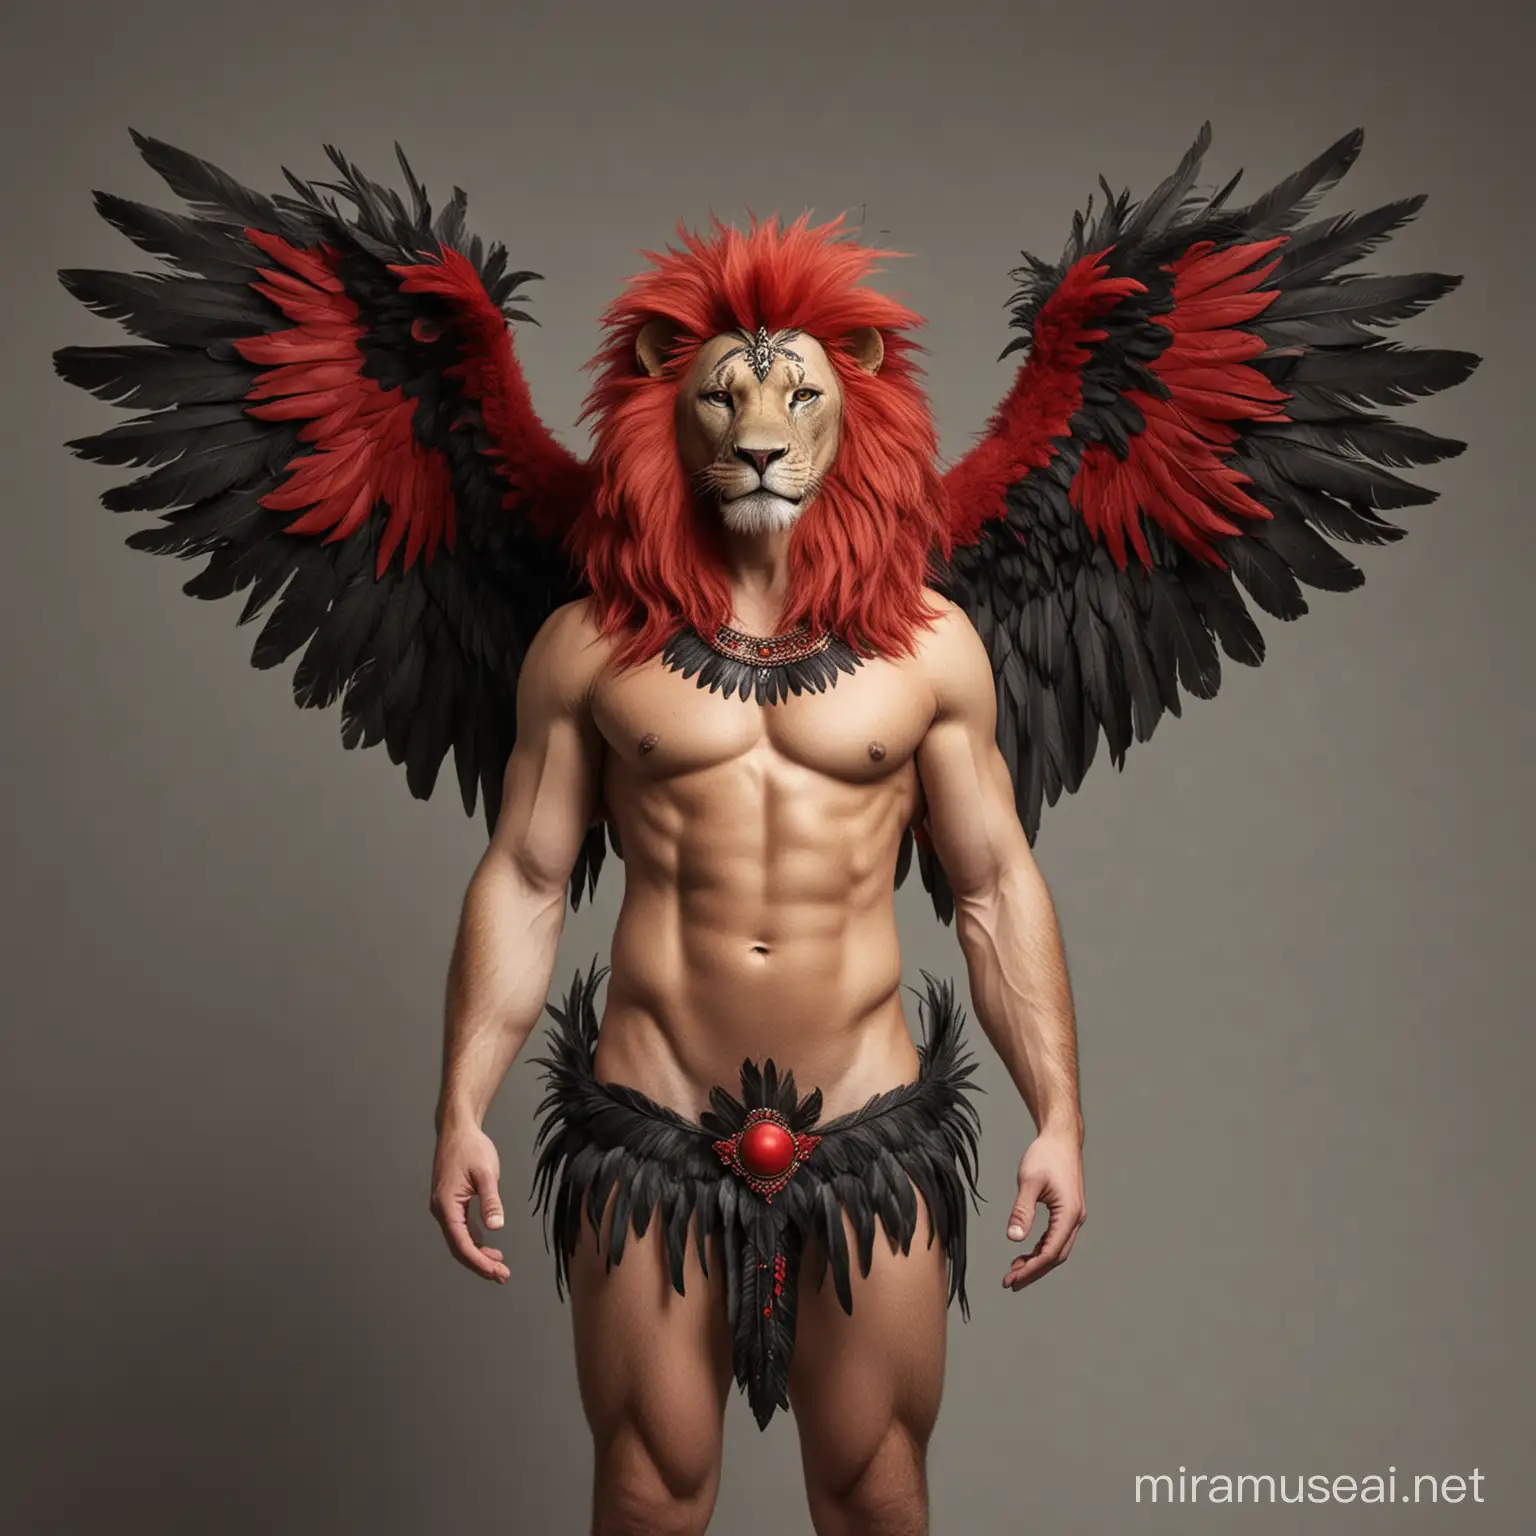 Majestic Mythical Creature LionBird Hybrid with Vibrant Black and Red Plumage